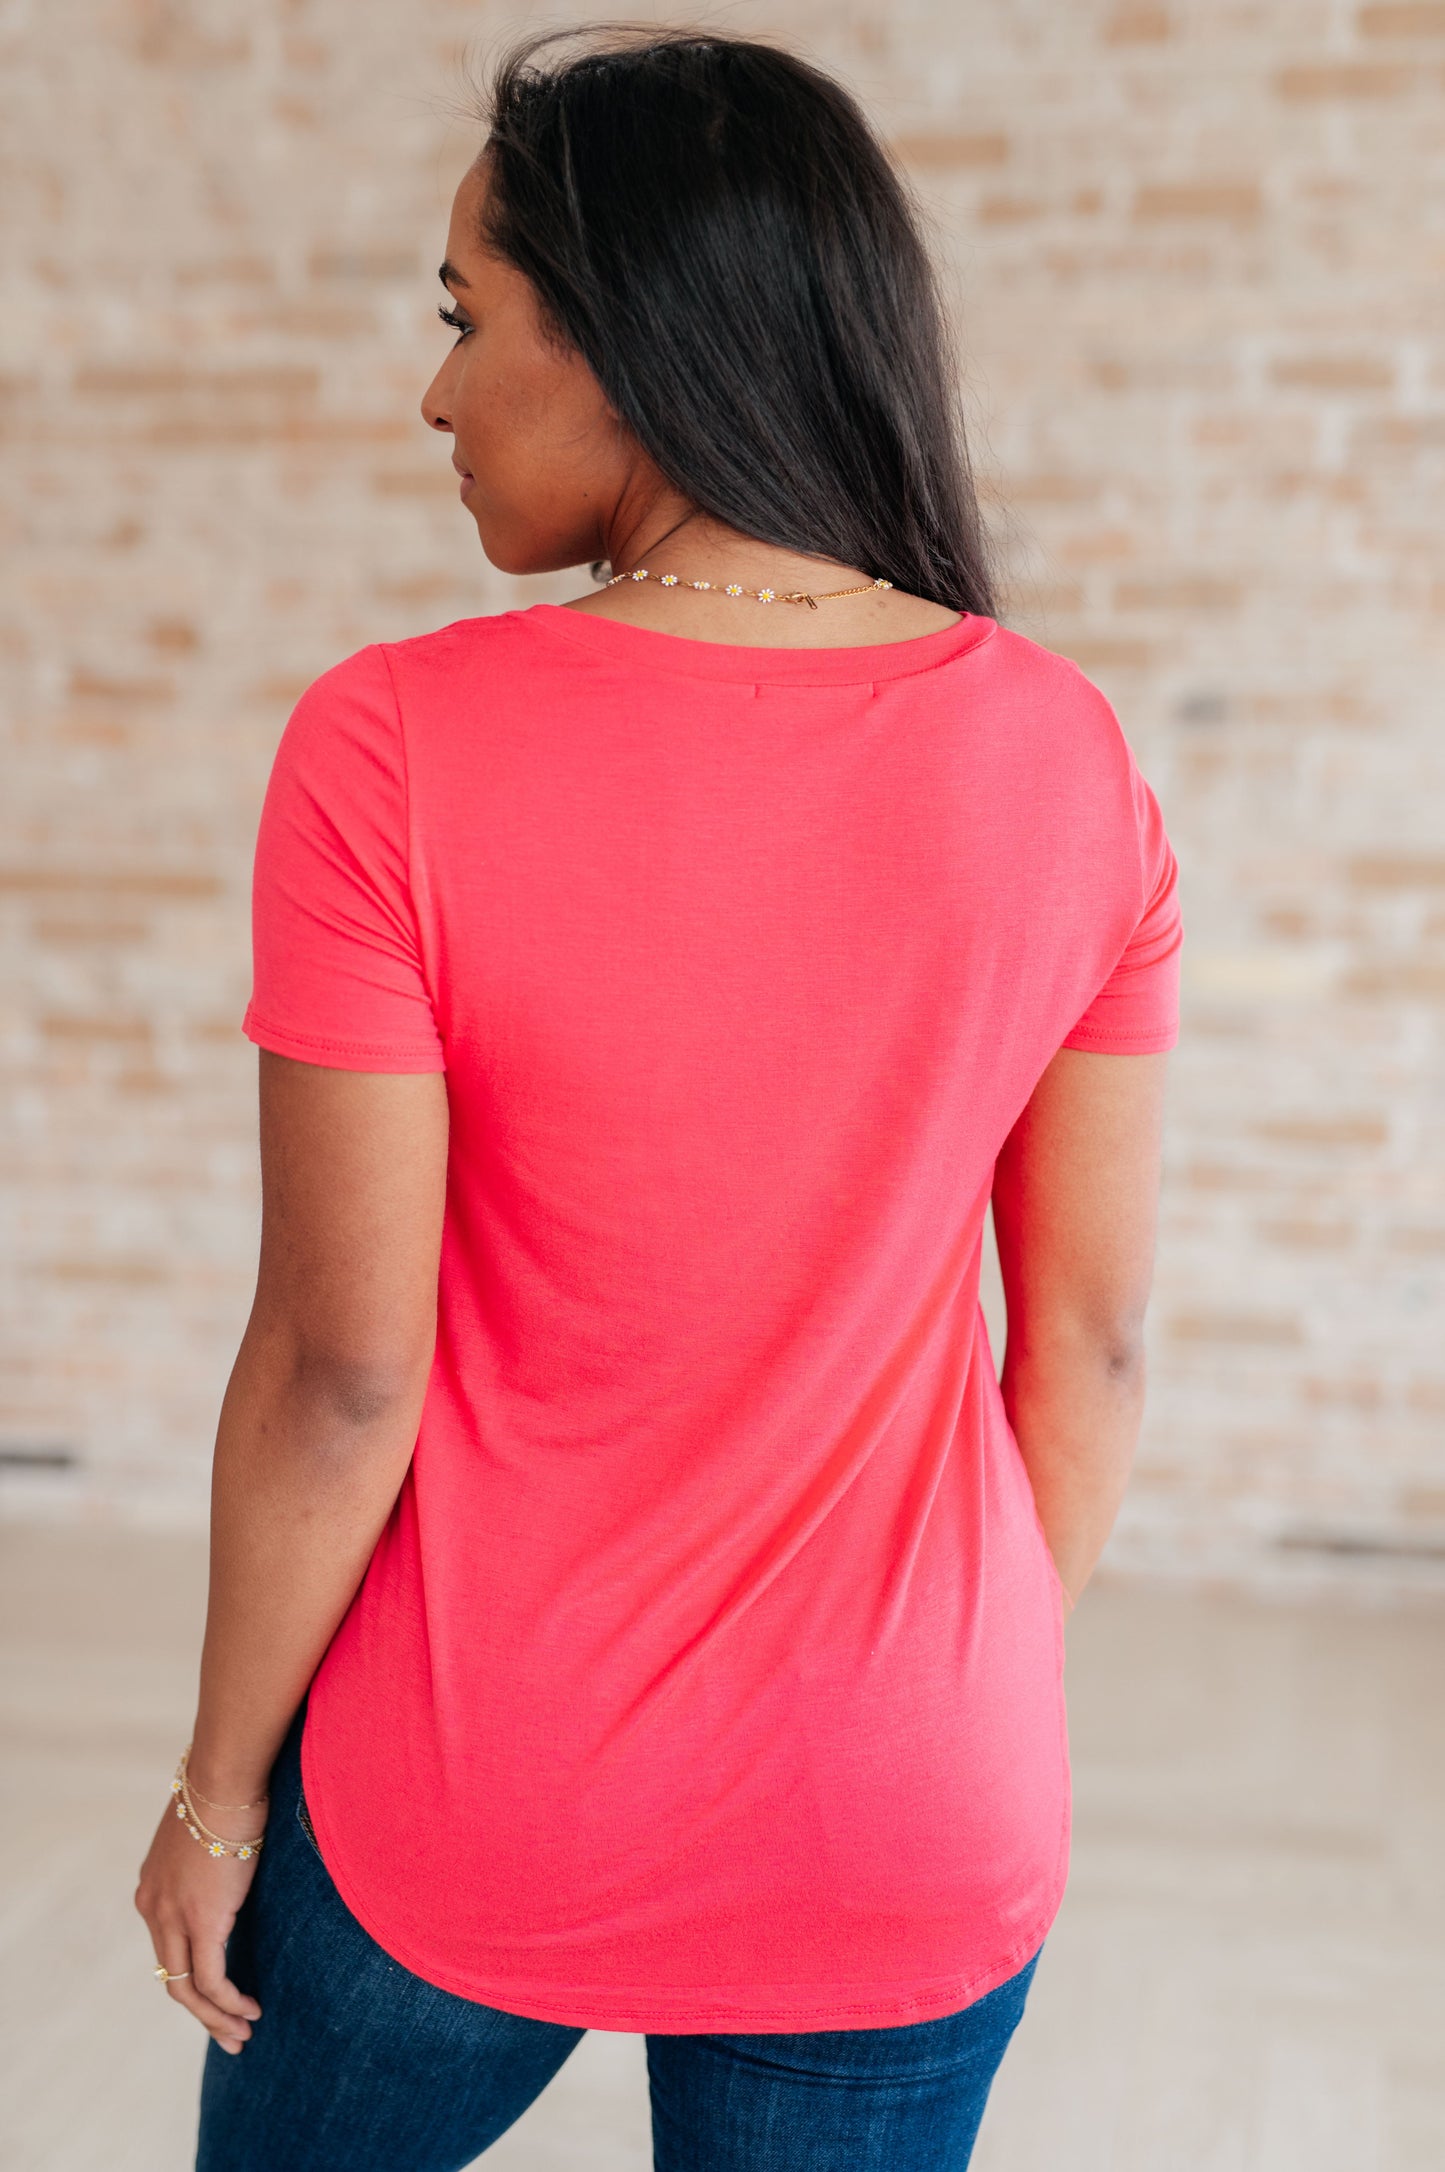 Back to the Basics Top in Azalea Red